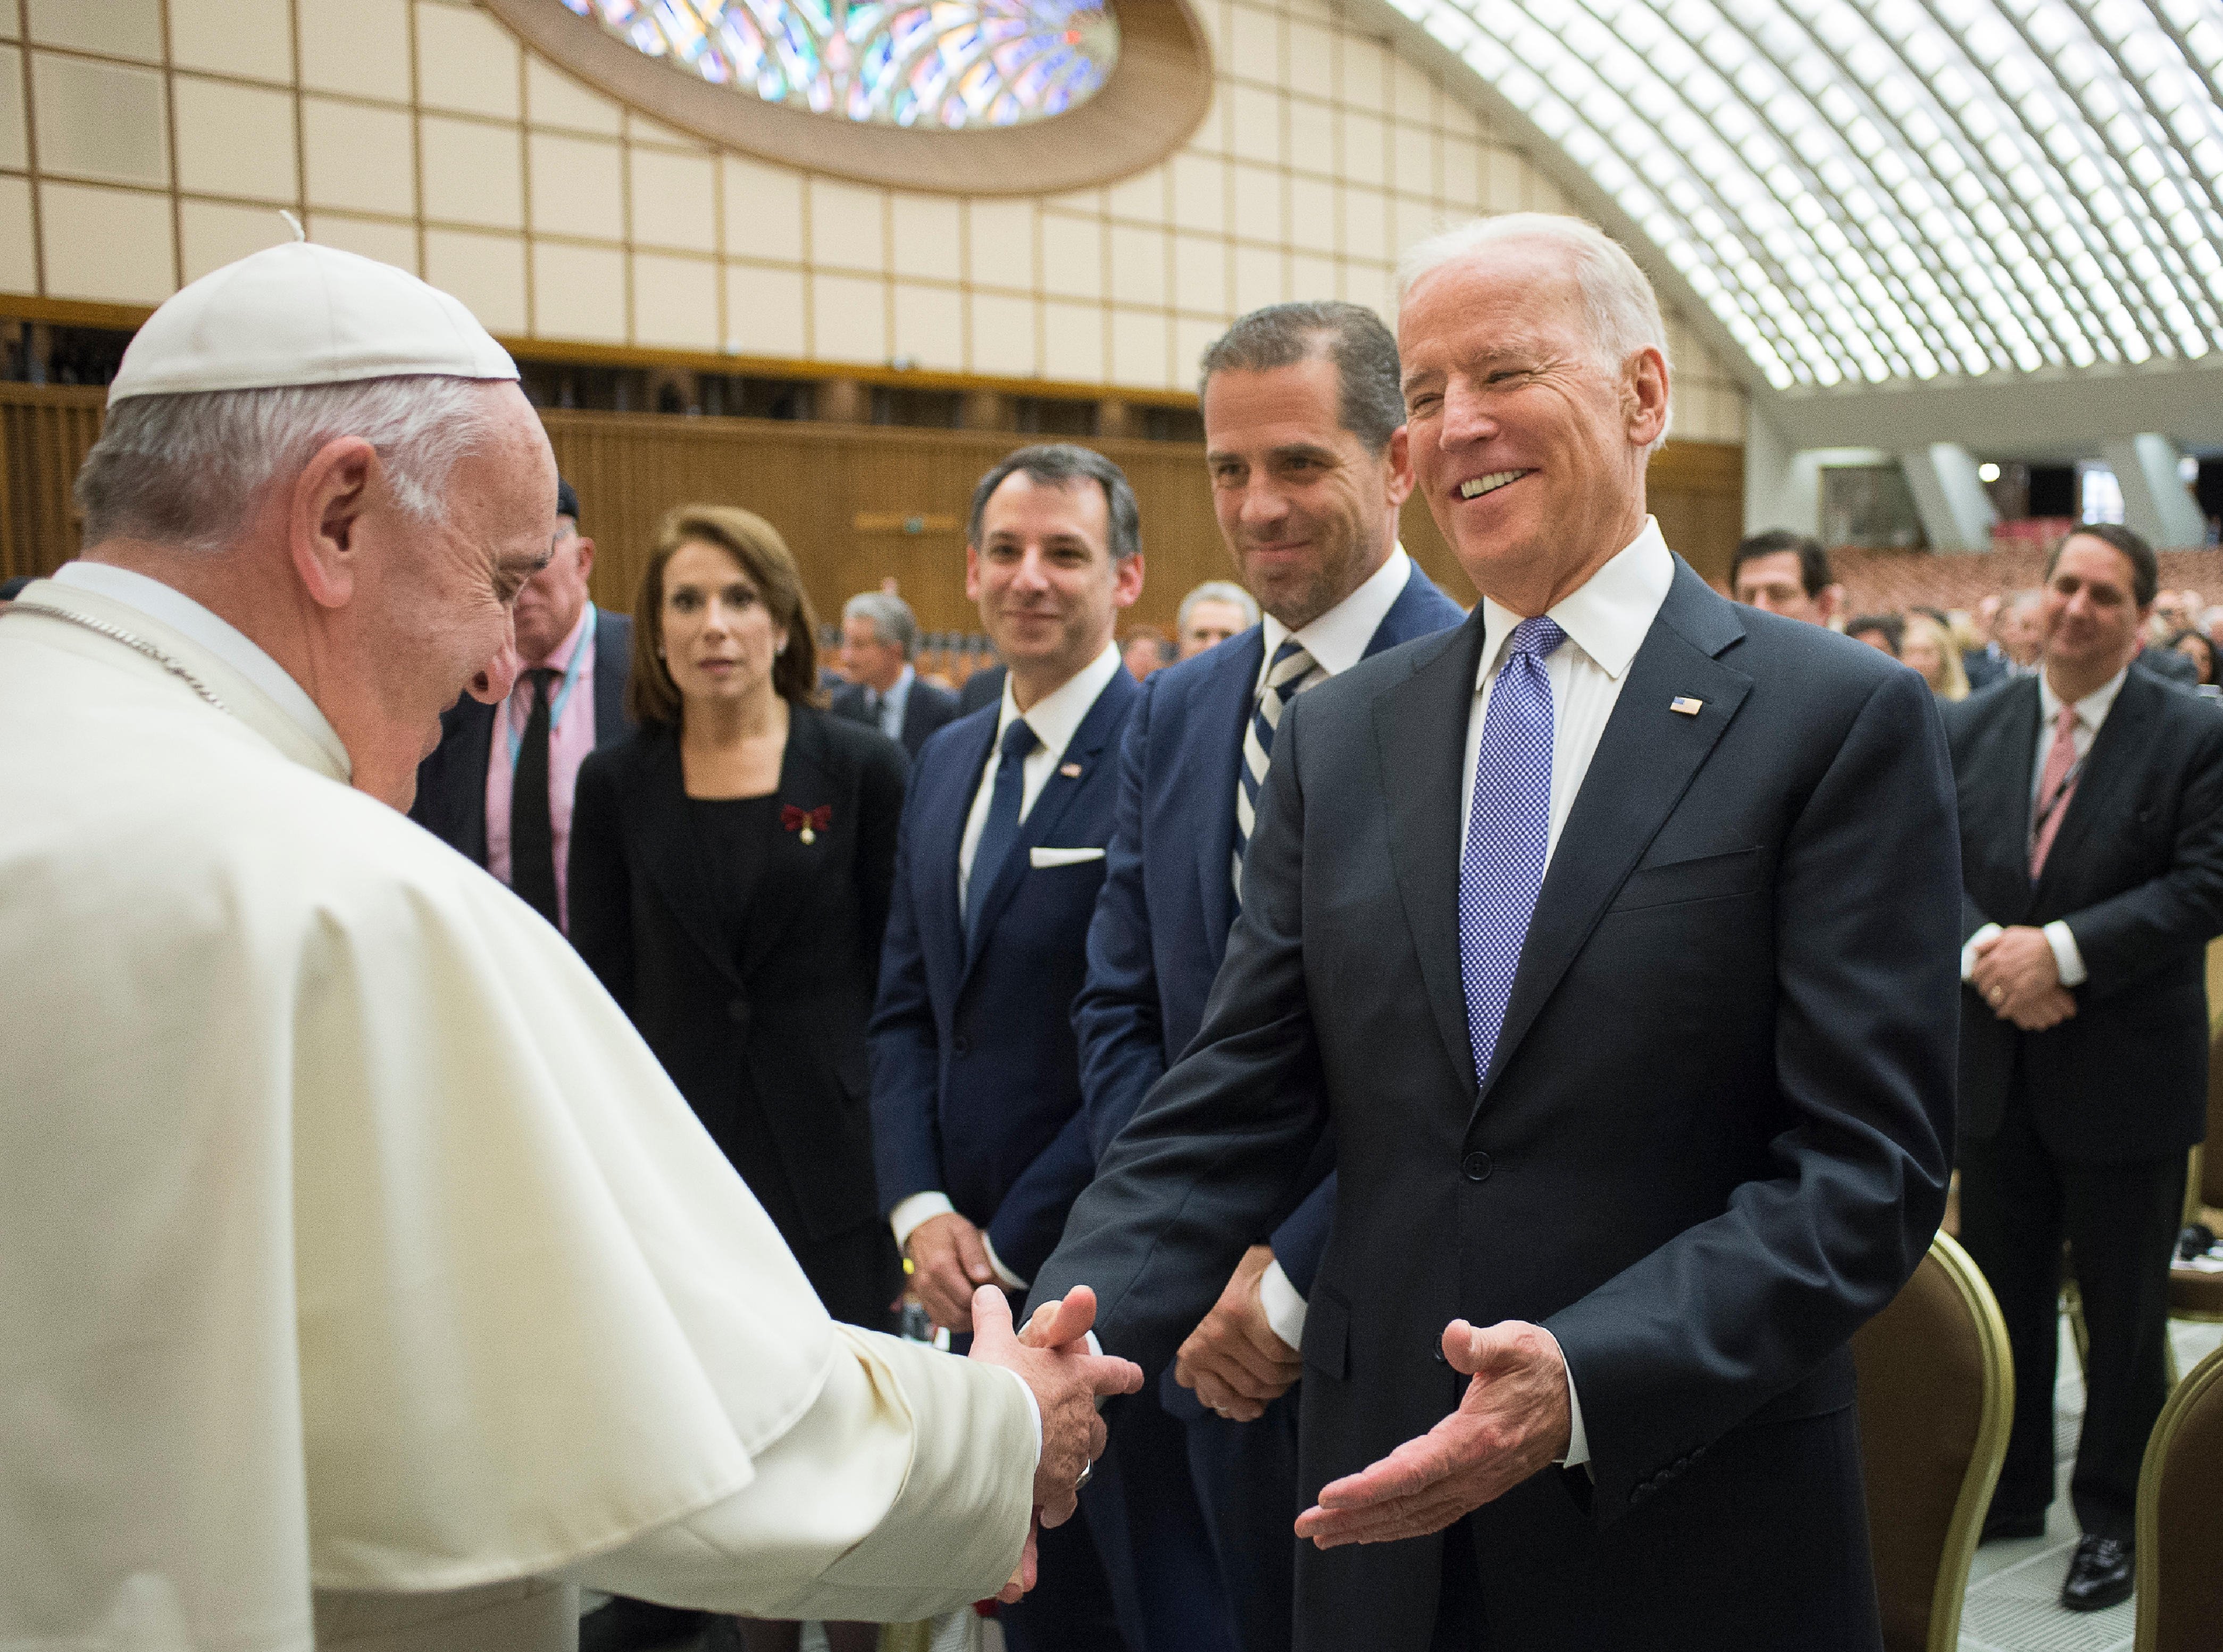 Pope Francis greets then-U.S. Vice President Joe Biden after both spoke at a conference on adult stem cell research at the Vatican April 29, 2016. In a recent interview, Archbishop Christophe Pierre, the Vatican ambassador to the U.S., said he is helping 